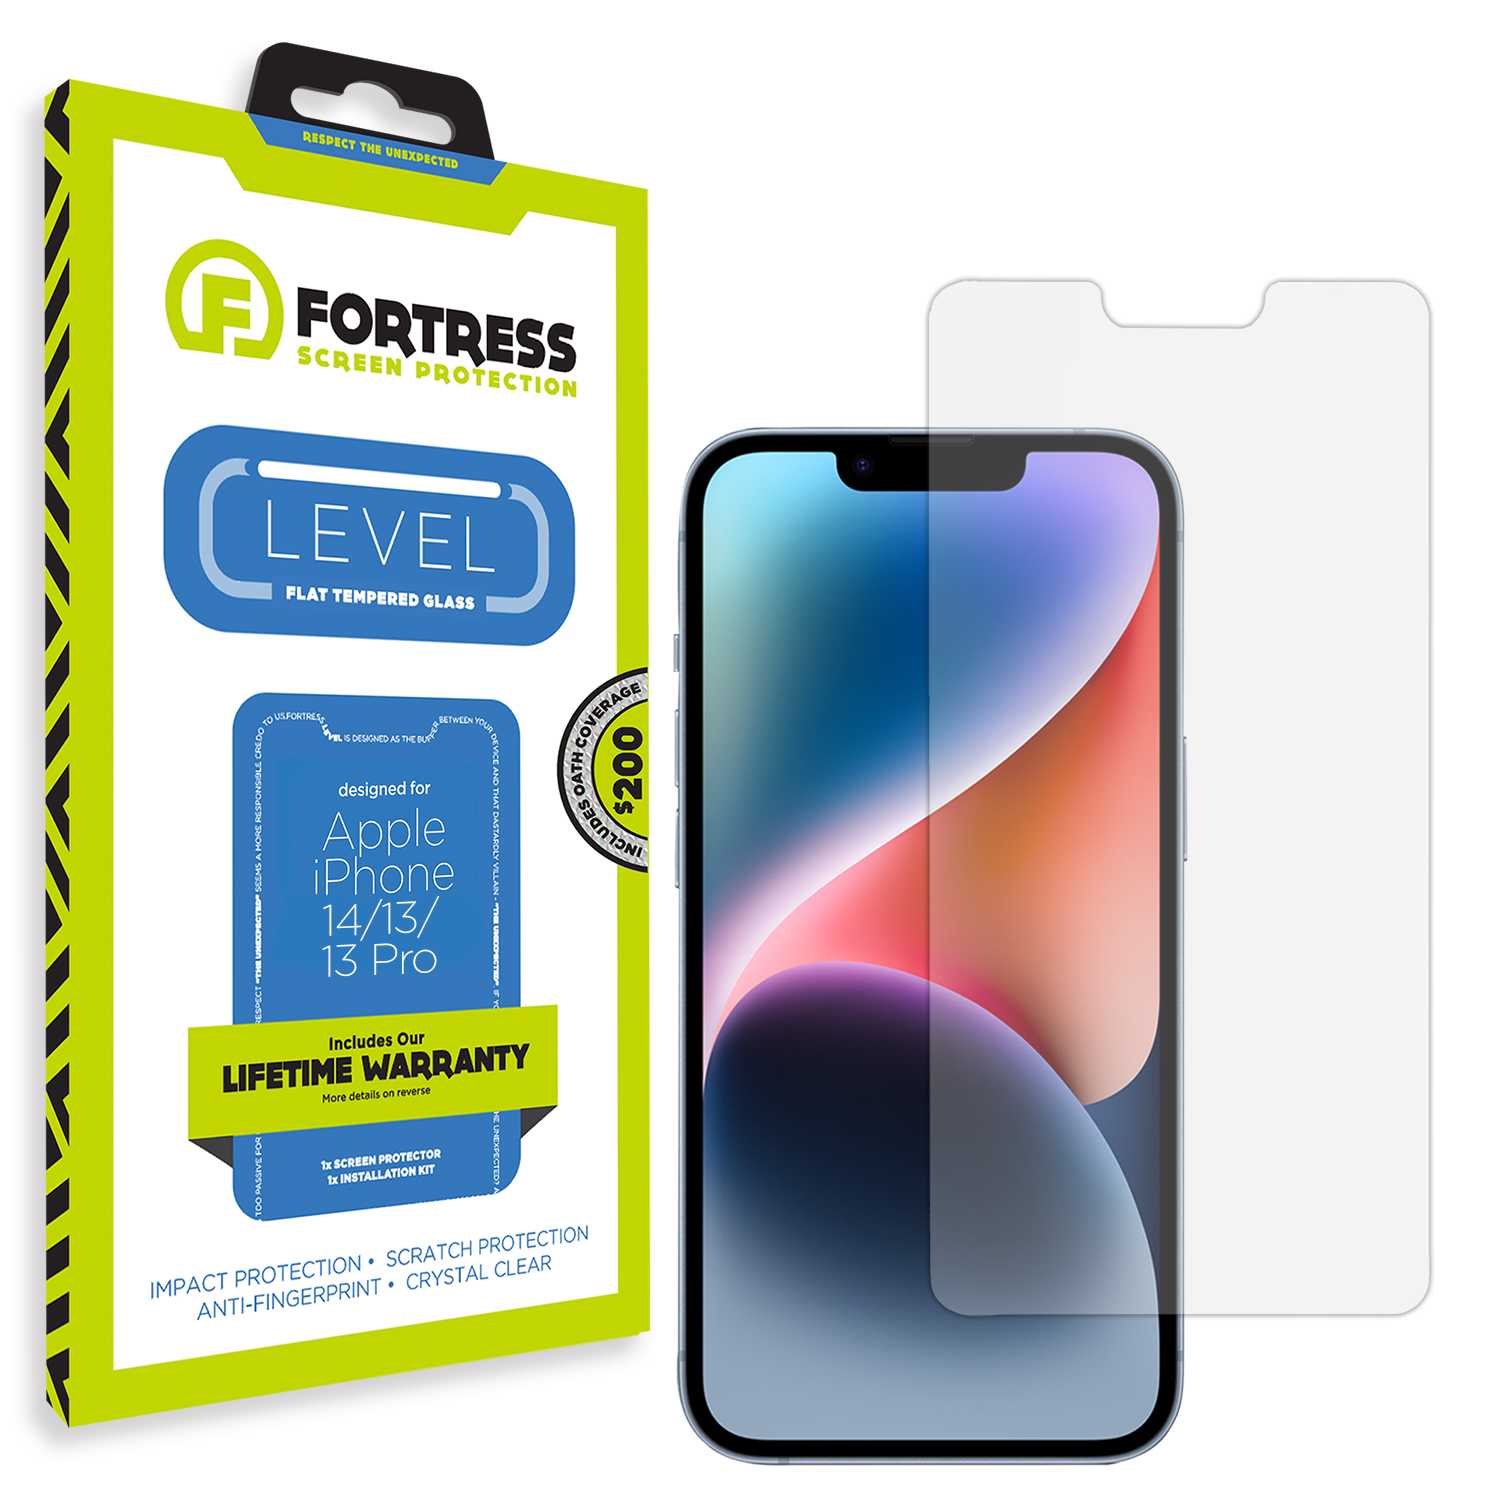 Fortress iPhone 14 Screen Protector $200Coverage Scooch Screen Protector